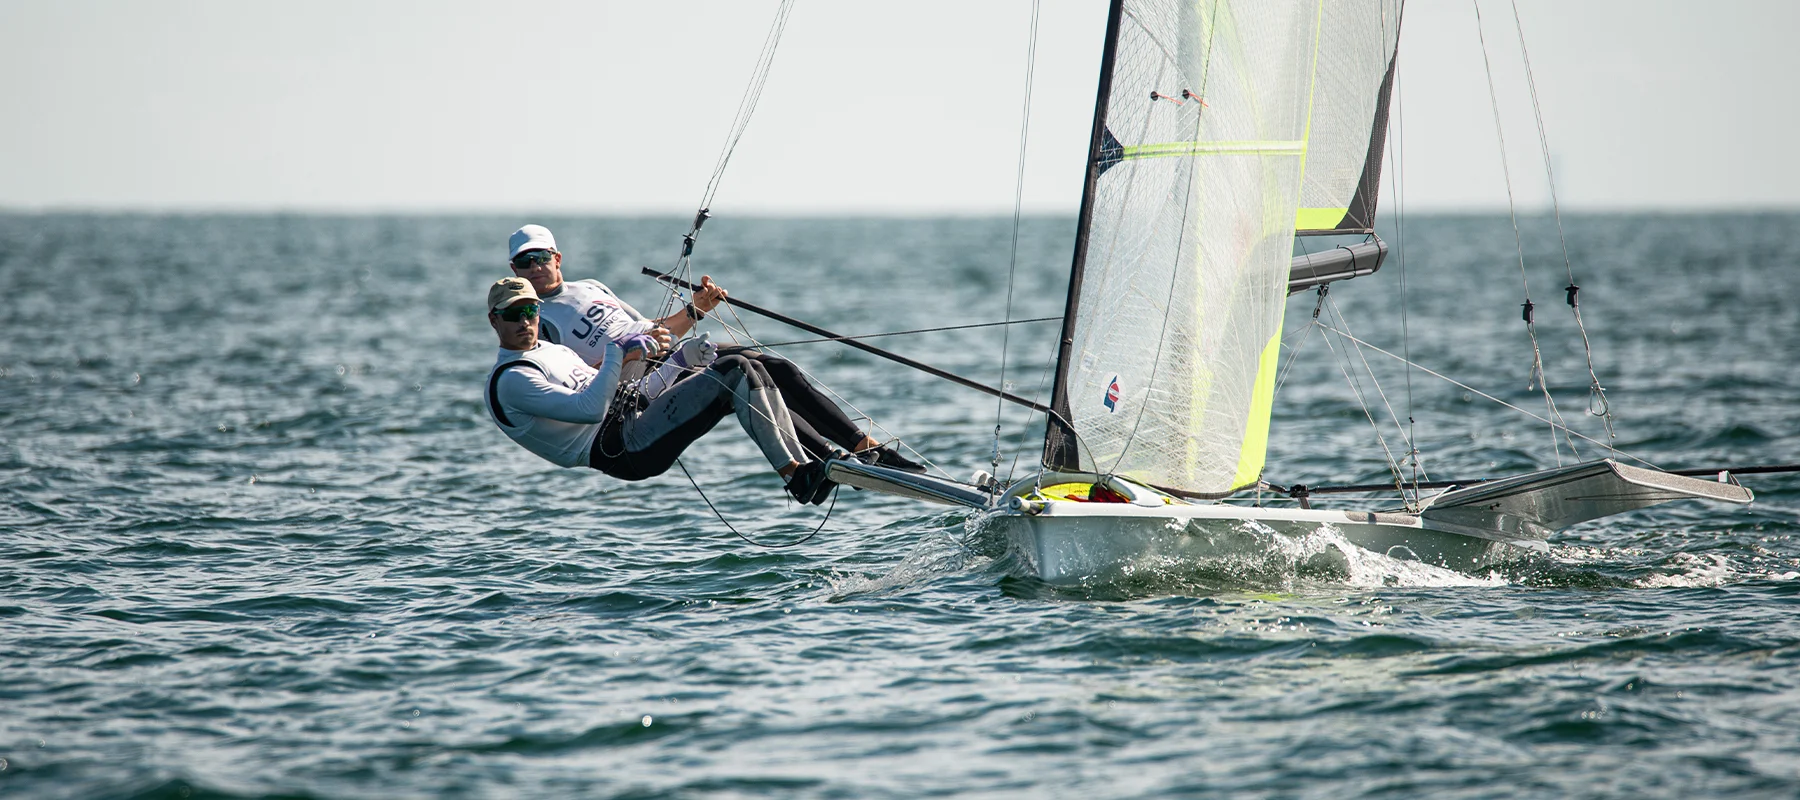 Training with WHOOP for Elite-Level Sailing